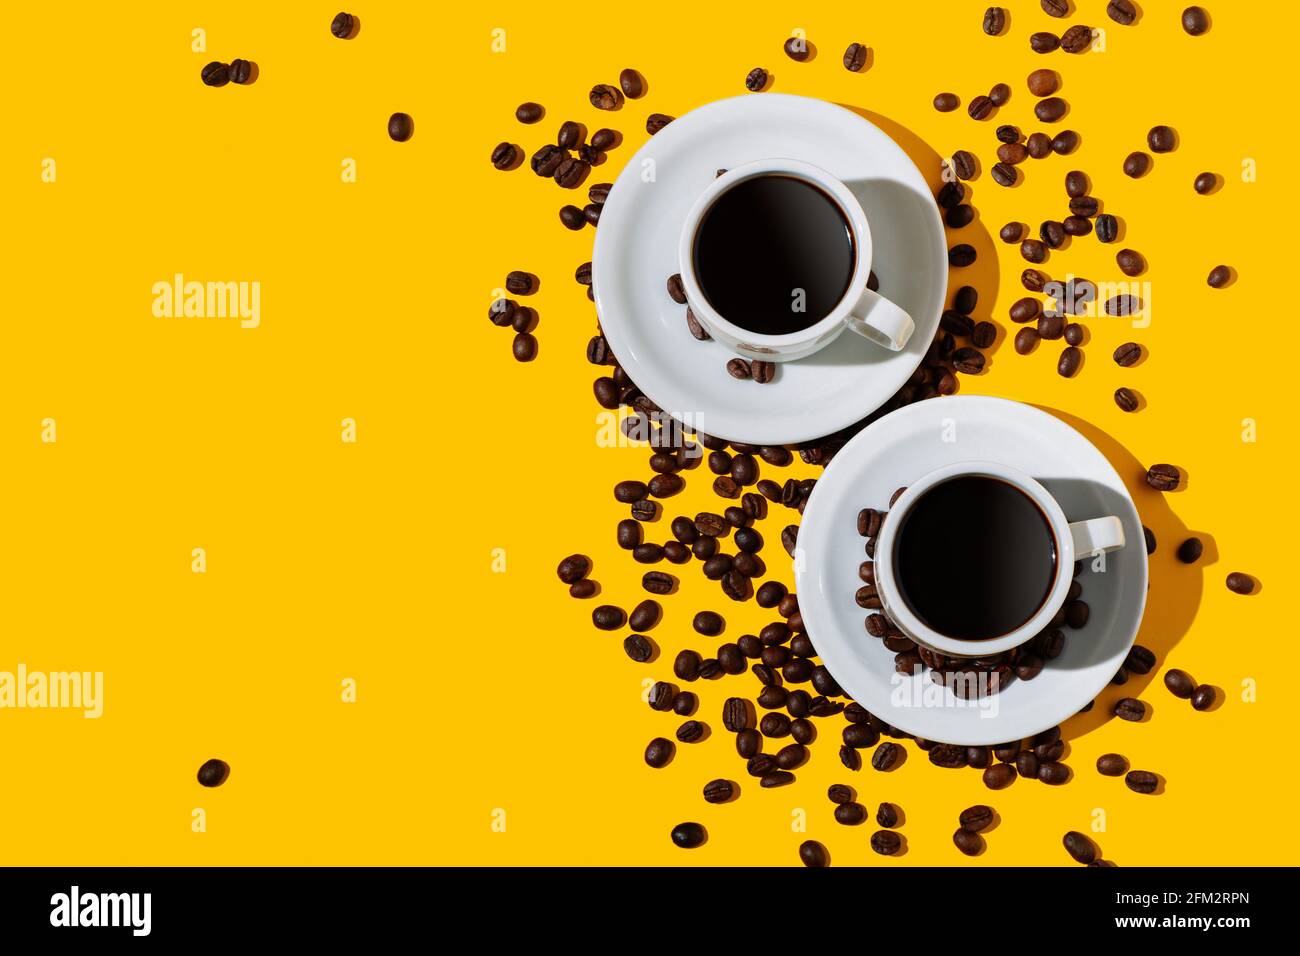 Top view of two coffee cup over a bright yellow color background and many beans spilled around. Stock Photo